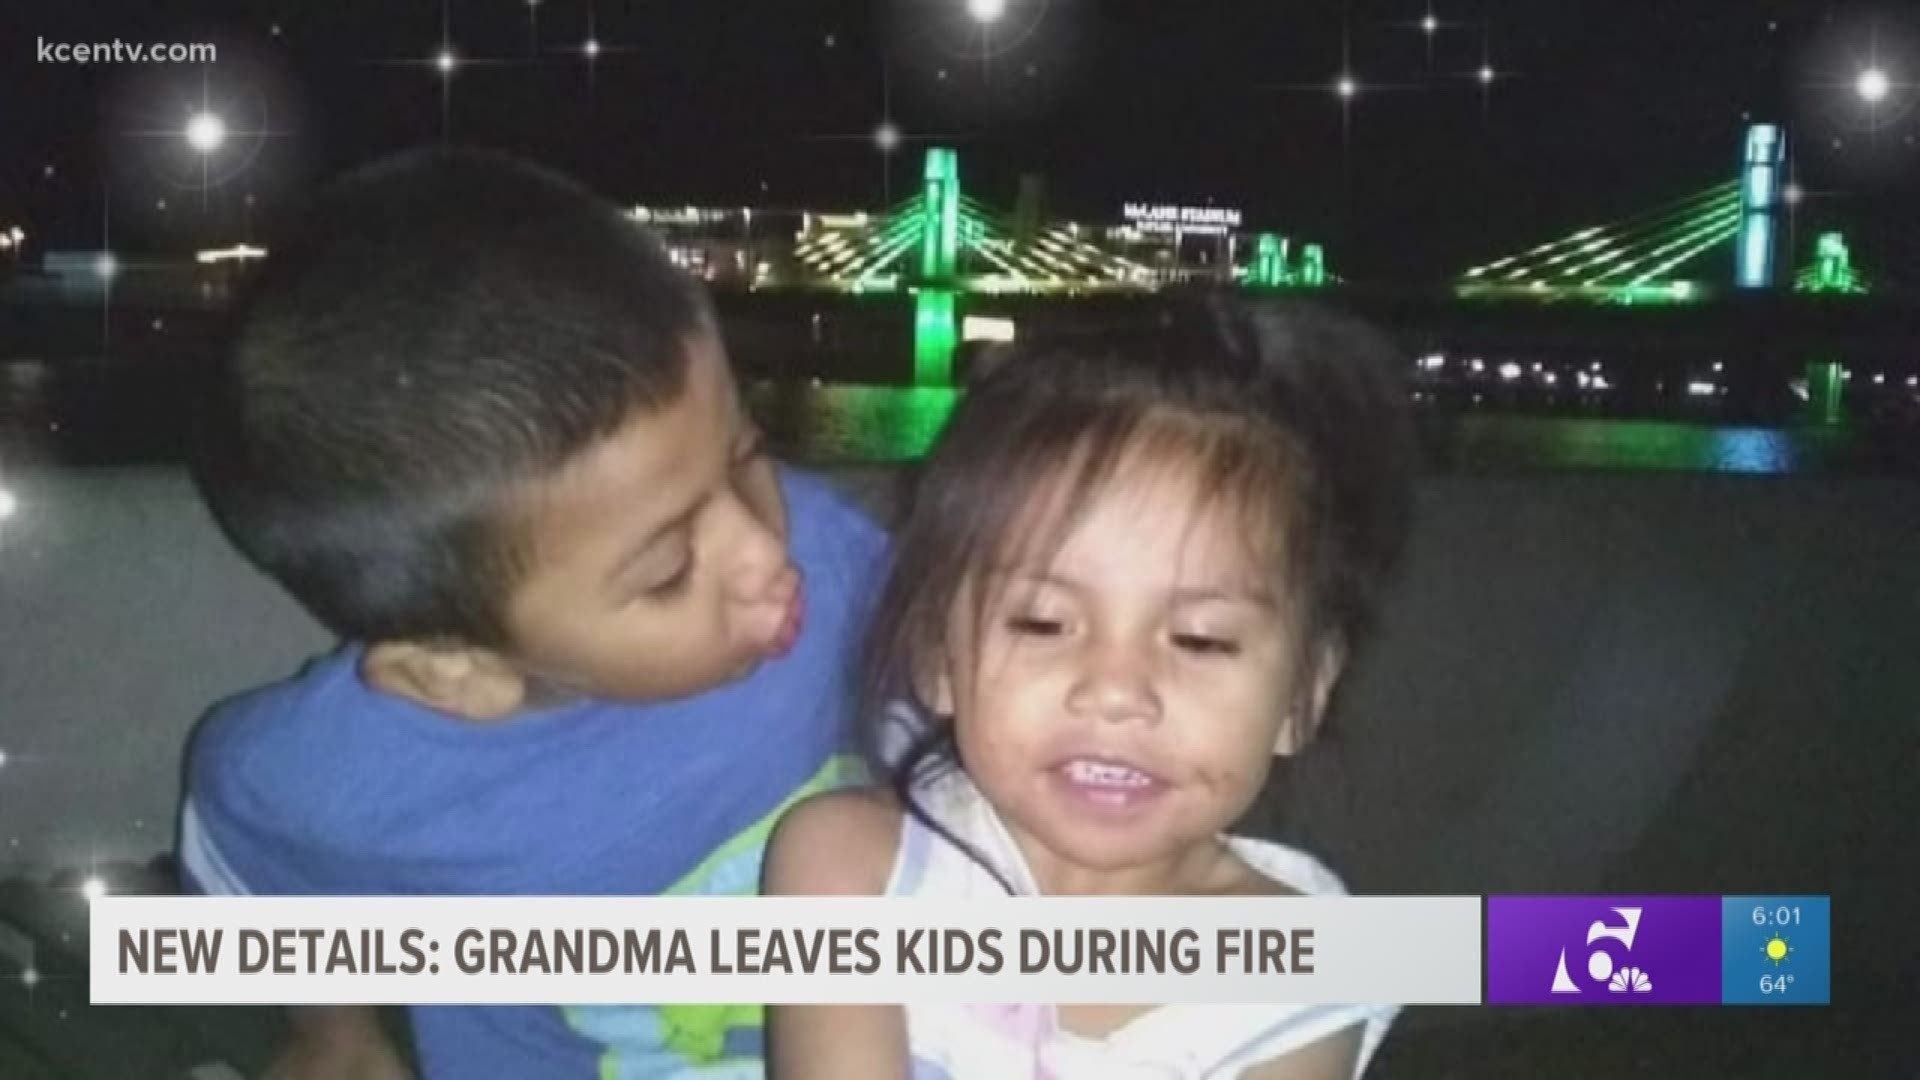 According to the arrest affidavit, the 44-year-old grandmother didn't make an effort to save her grandchildren from the burning home.